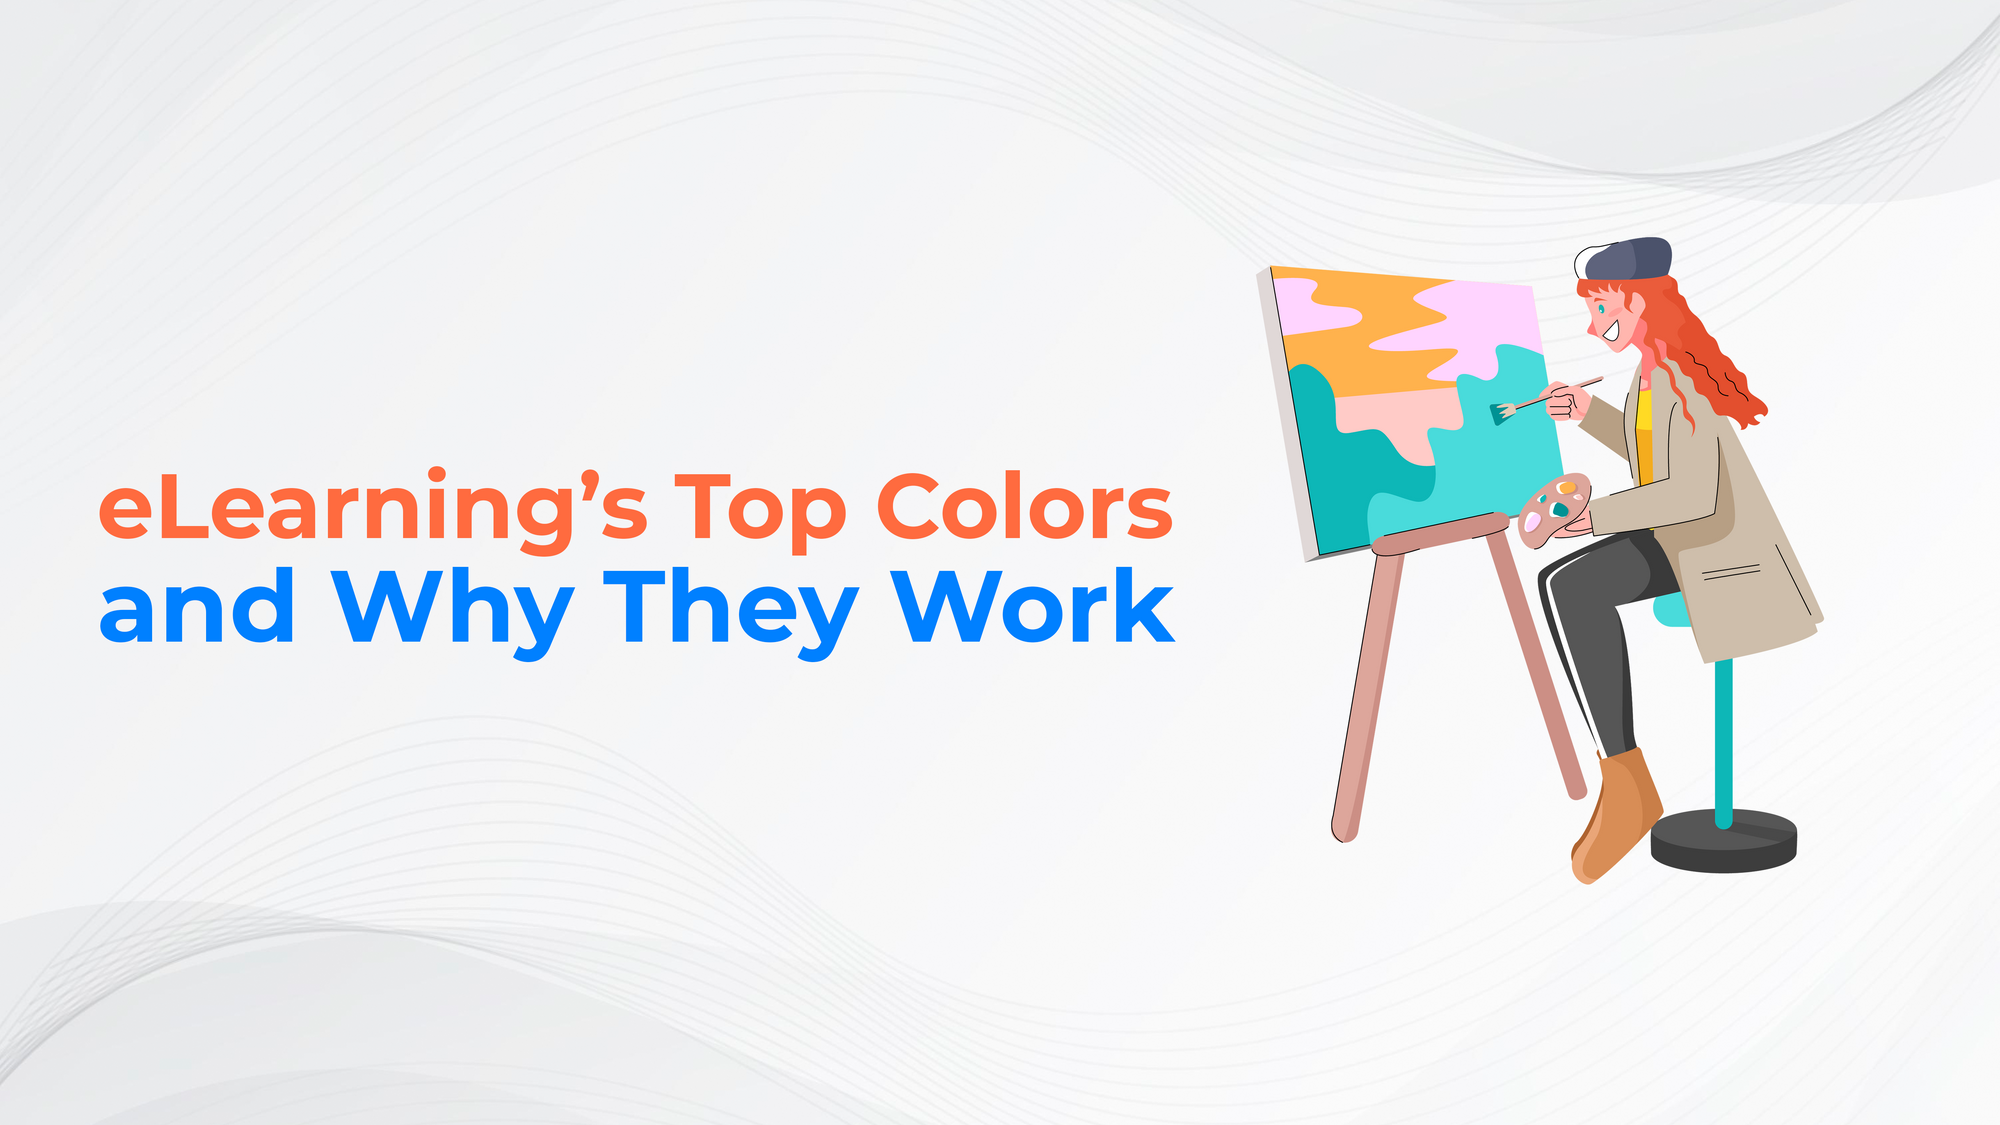 eLearning's top colors and why they work